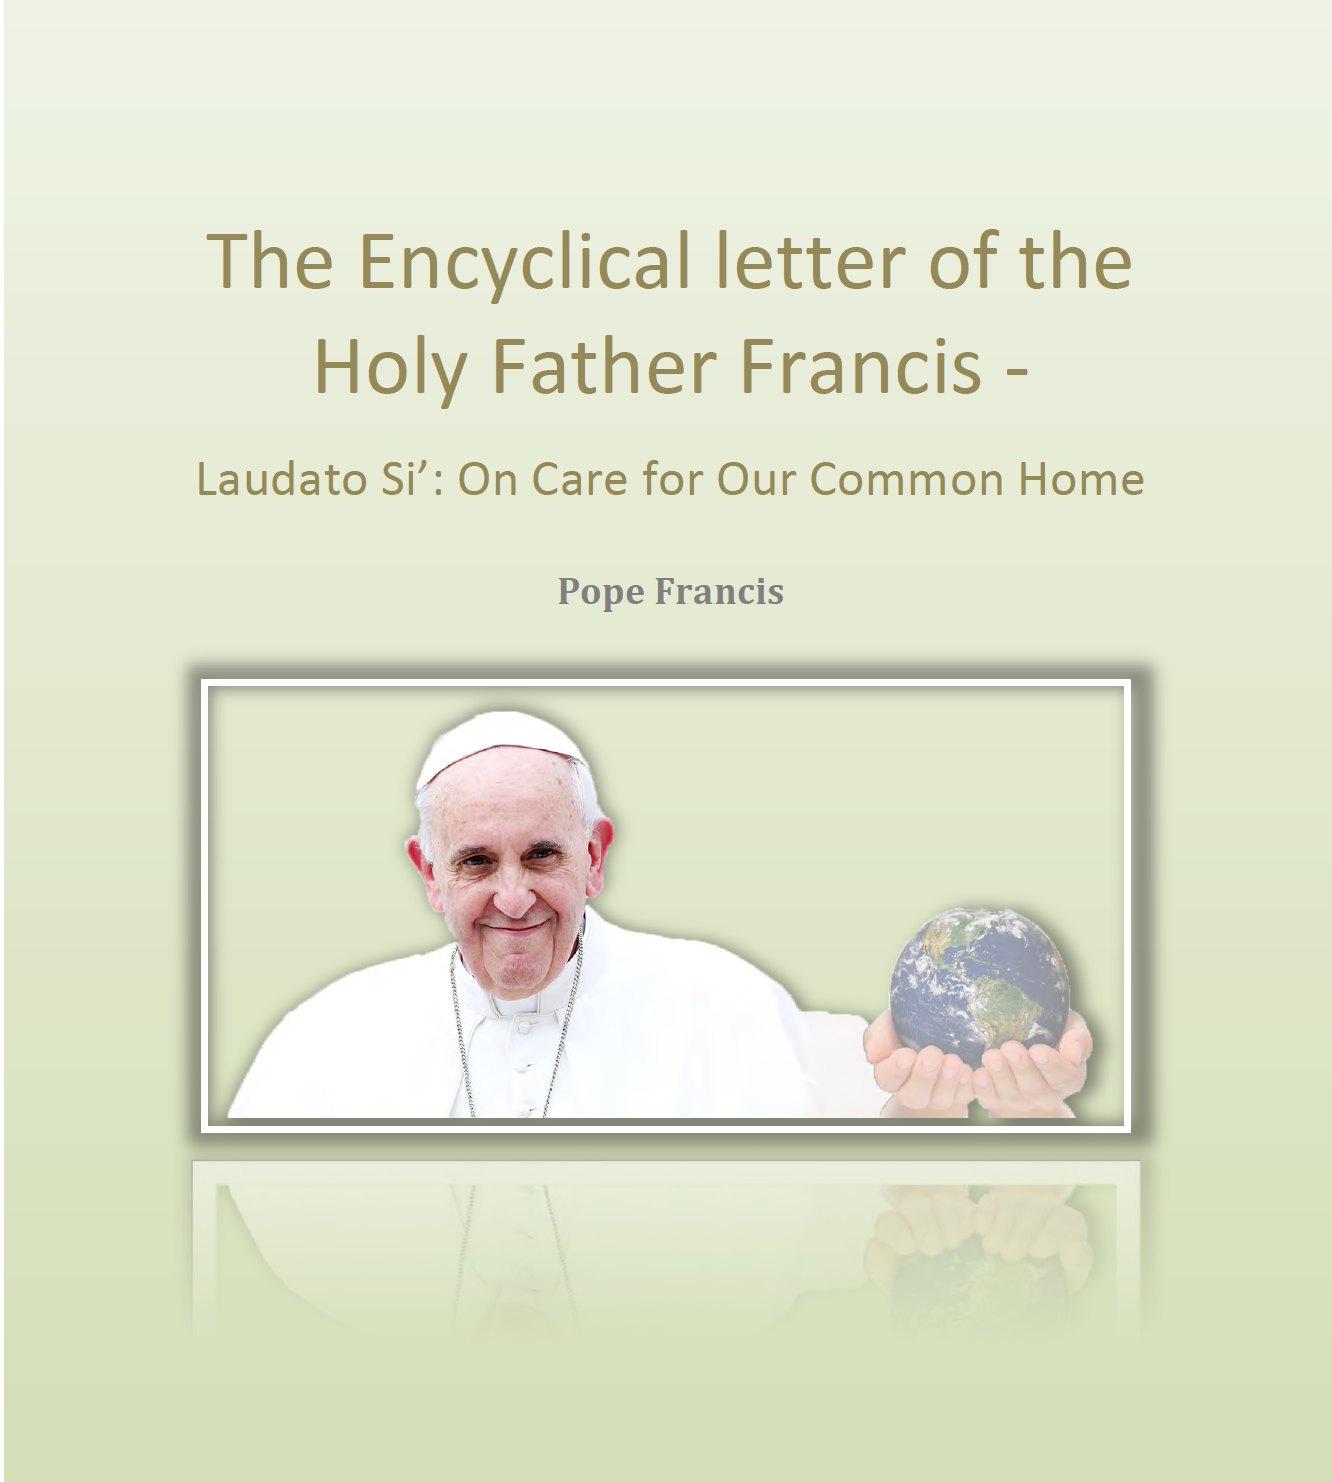 The Encyclical letter of the Holy Father Francis: On Care for Our Common Home PDF